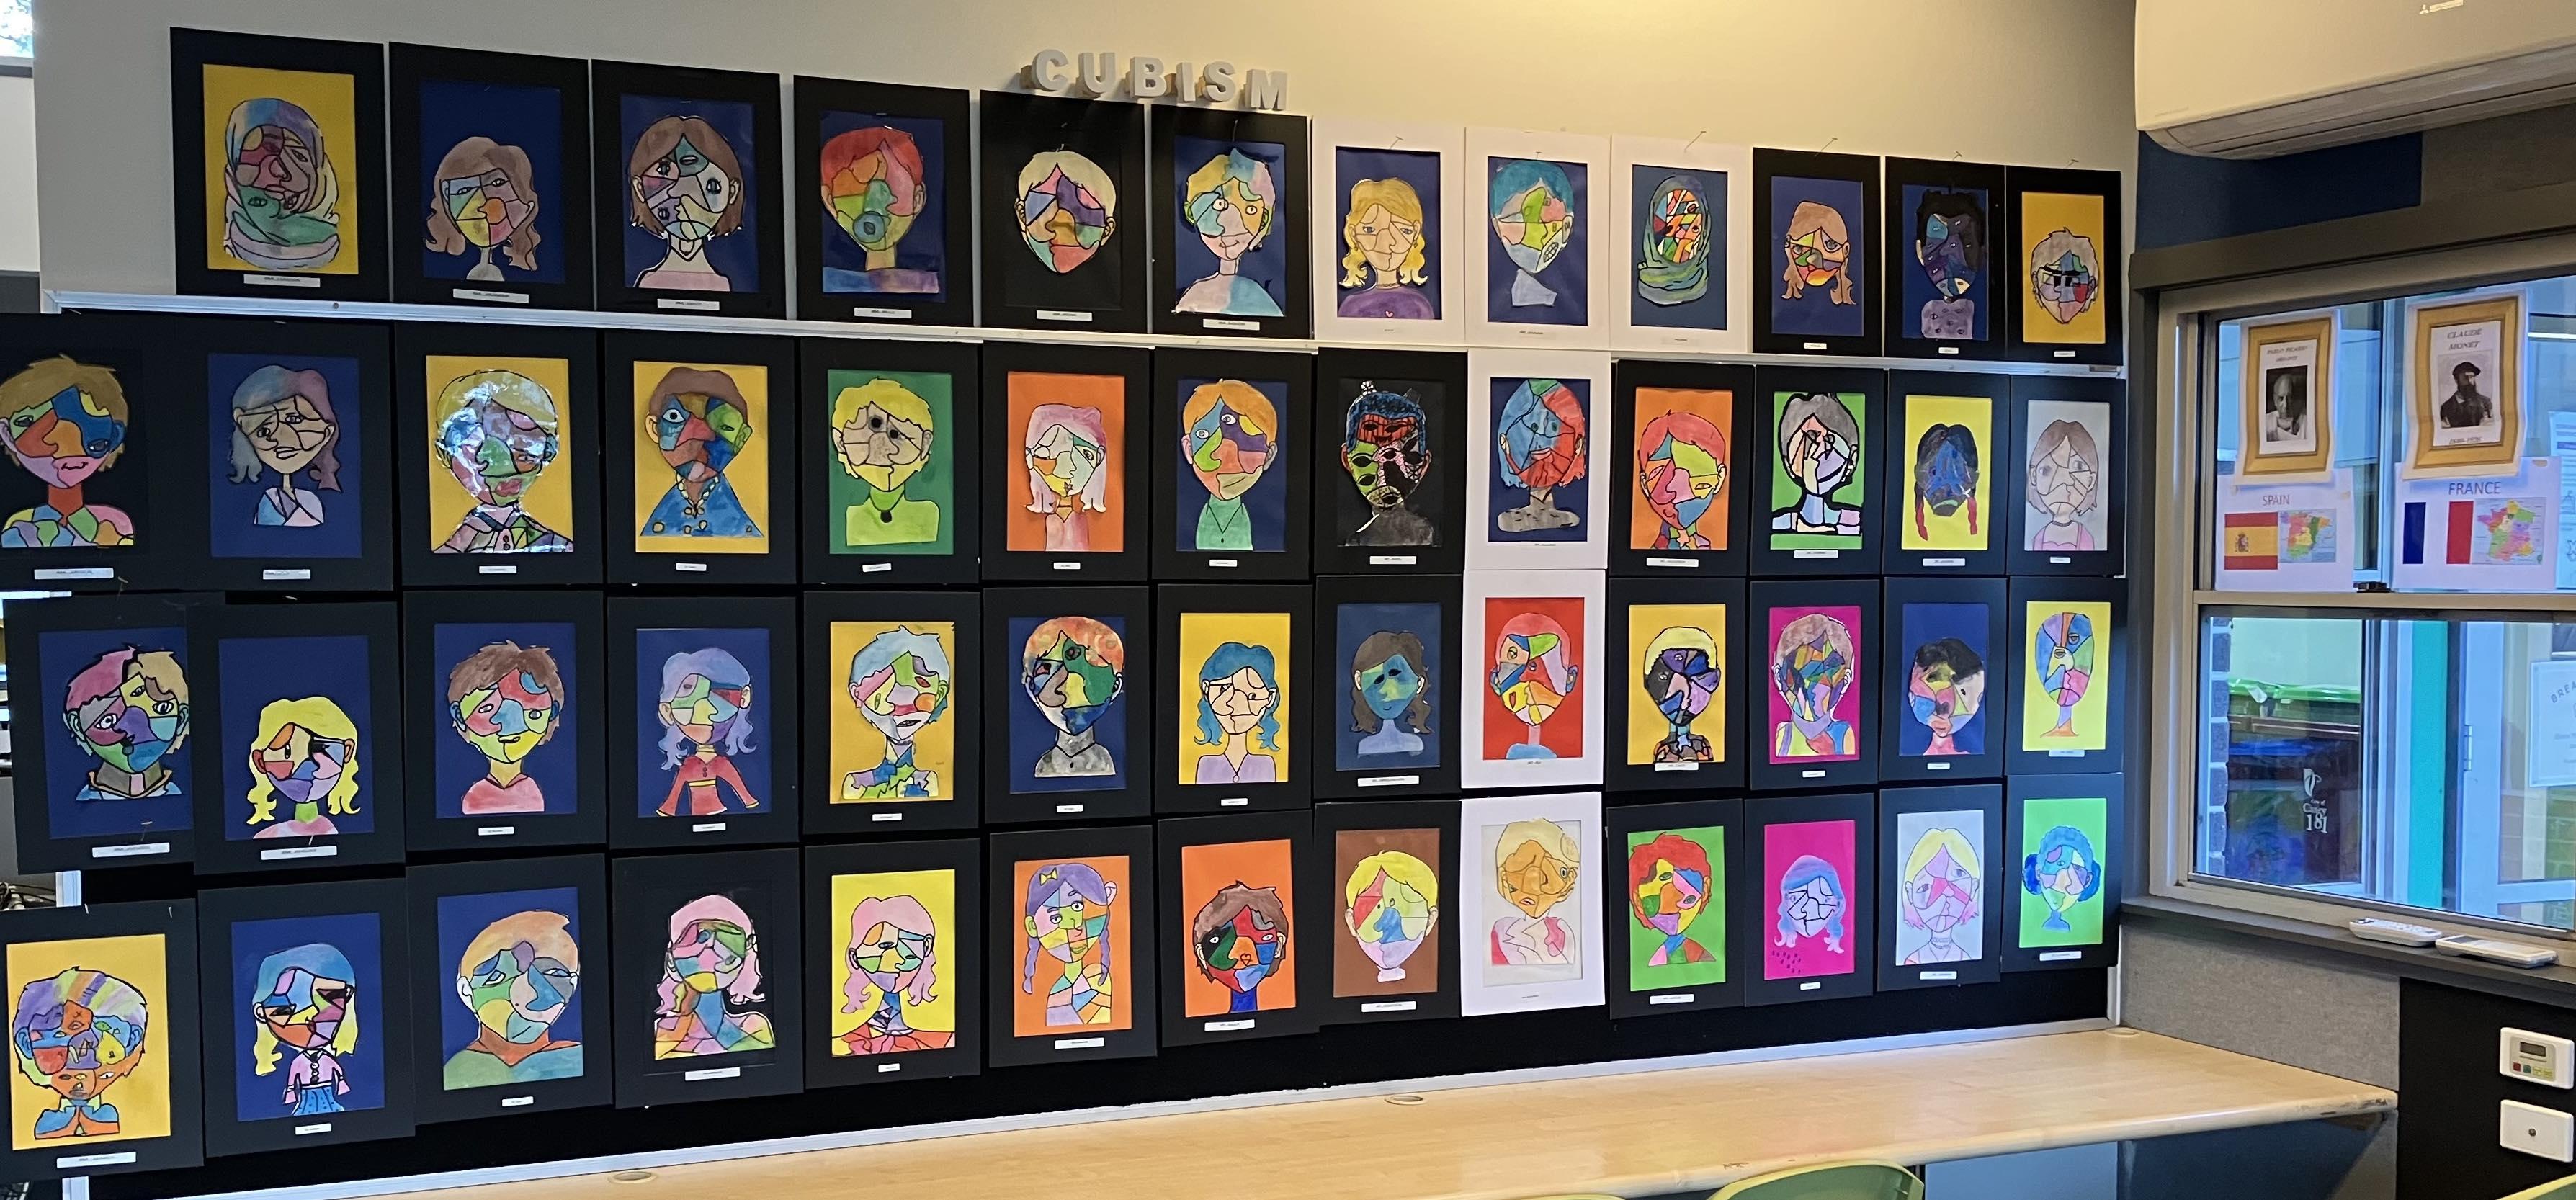 Year 4 Cubism and Picasso Portraits